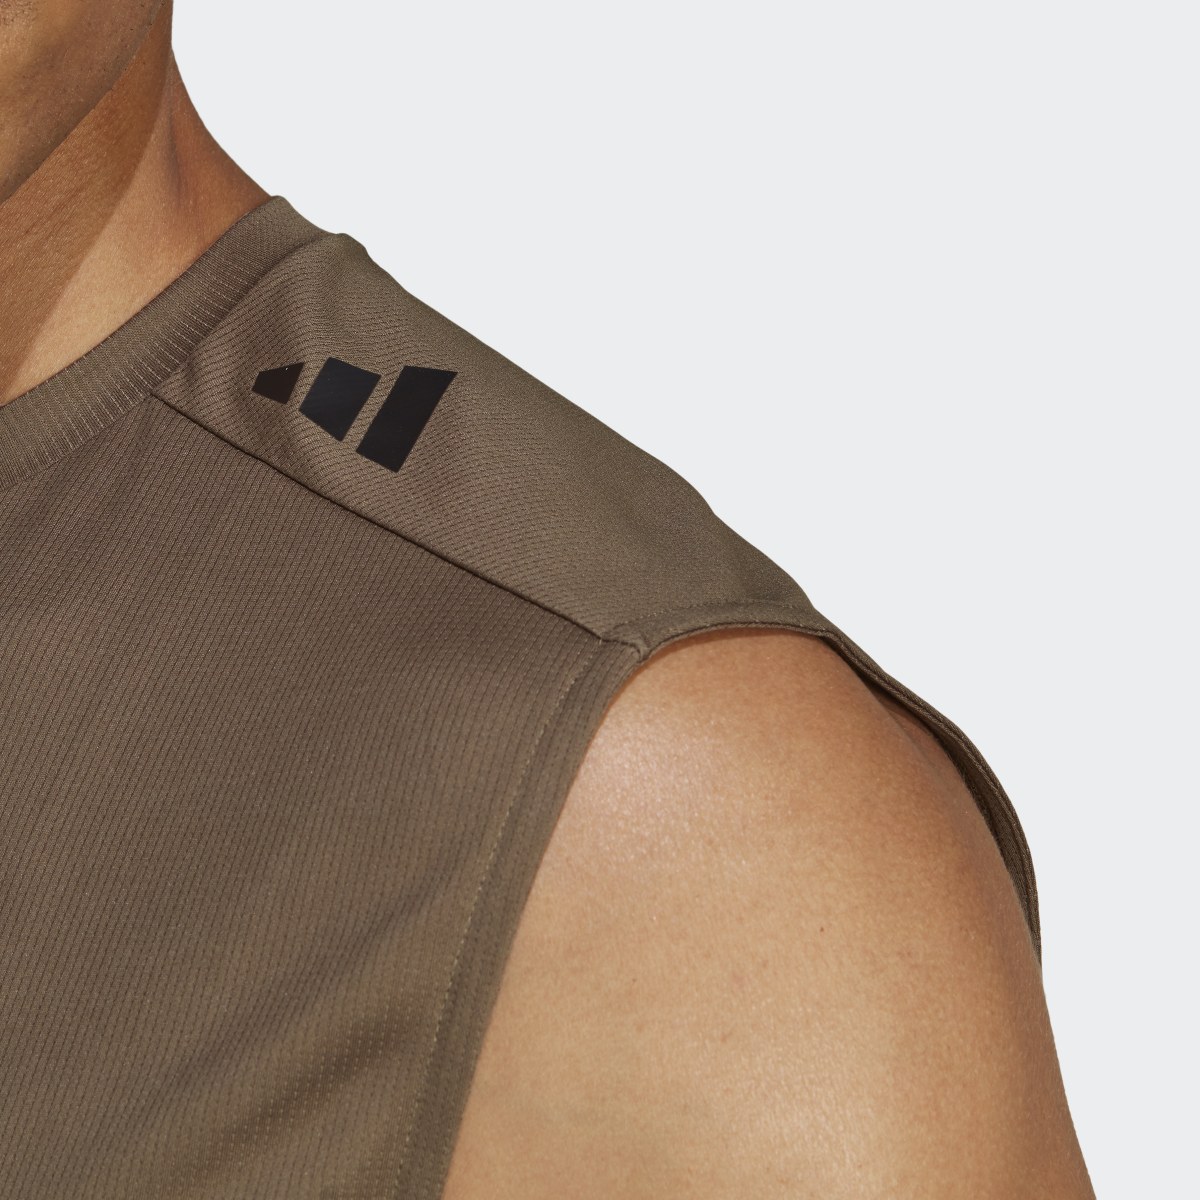 Adidas HIIT Tank Top Curated By Cody Rigsby. 6